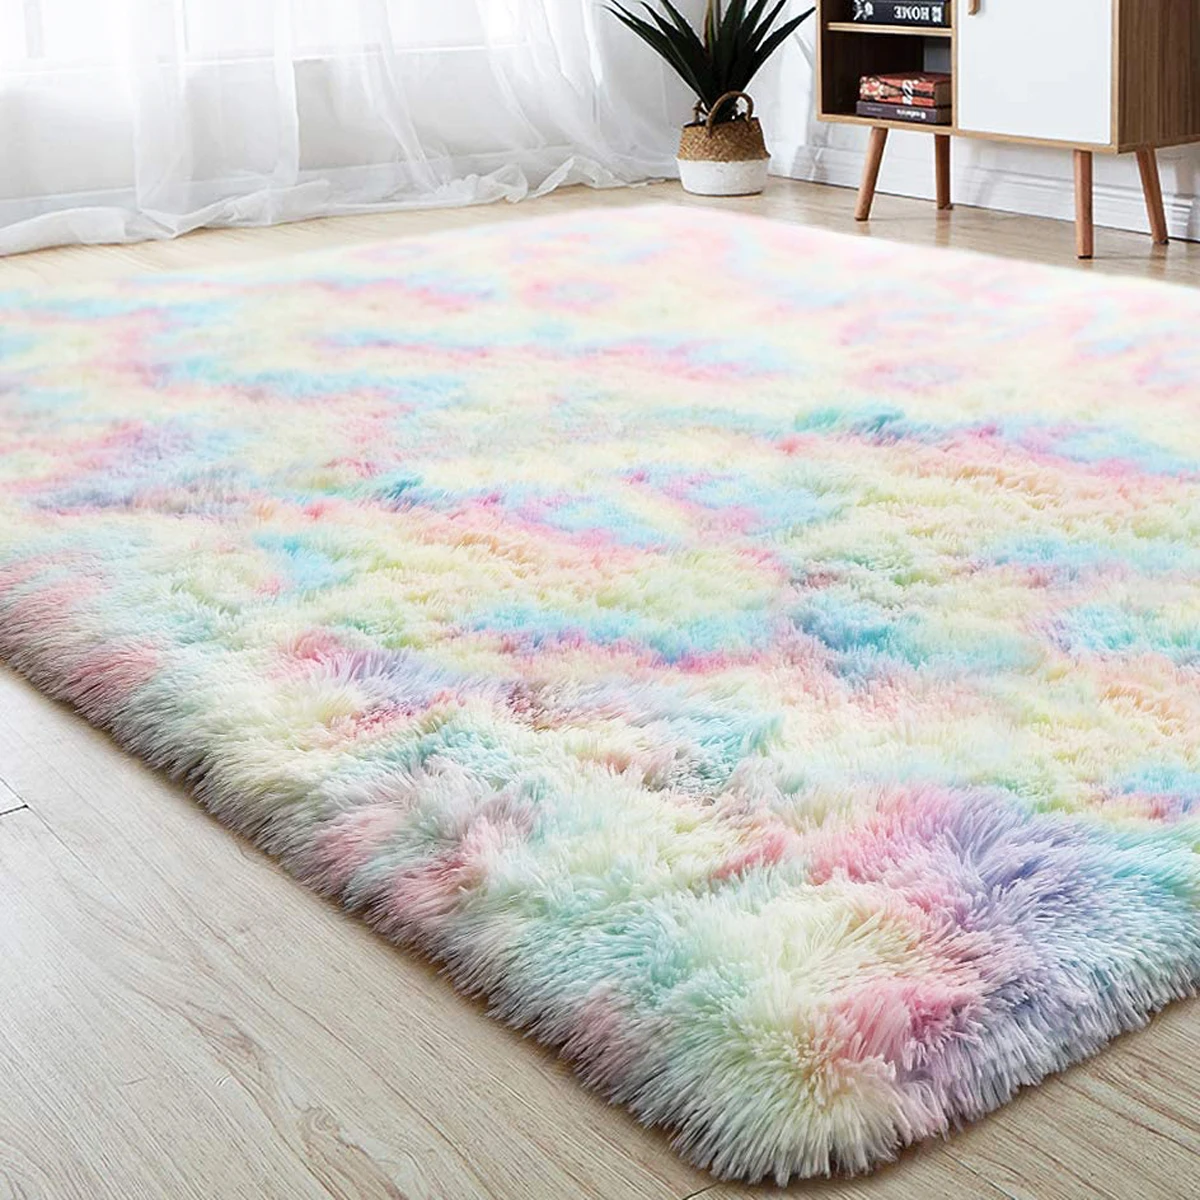 Fluffy Rugs Anti-Skid thick Shaggy Area  Dining Home Room Bedroom Carpet 